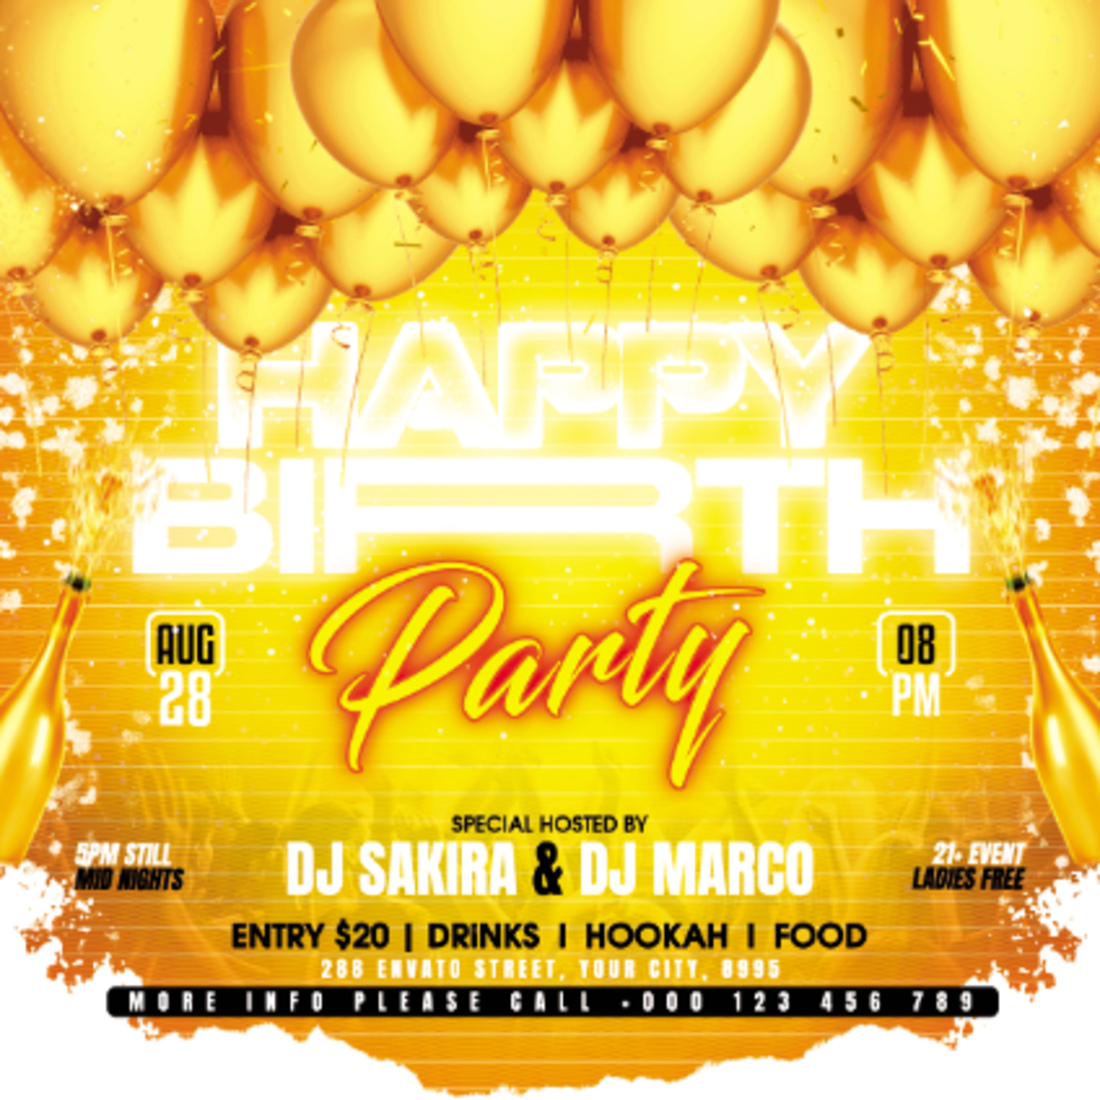 HAPPY BIRTHDAY PARTY TEMPLATE cover image.